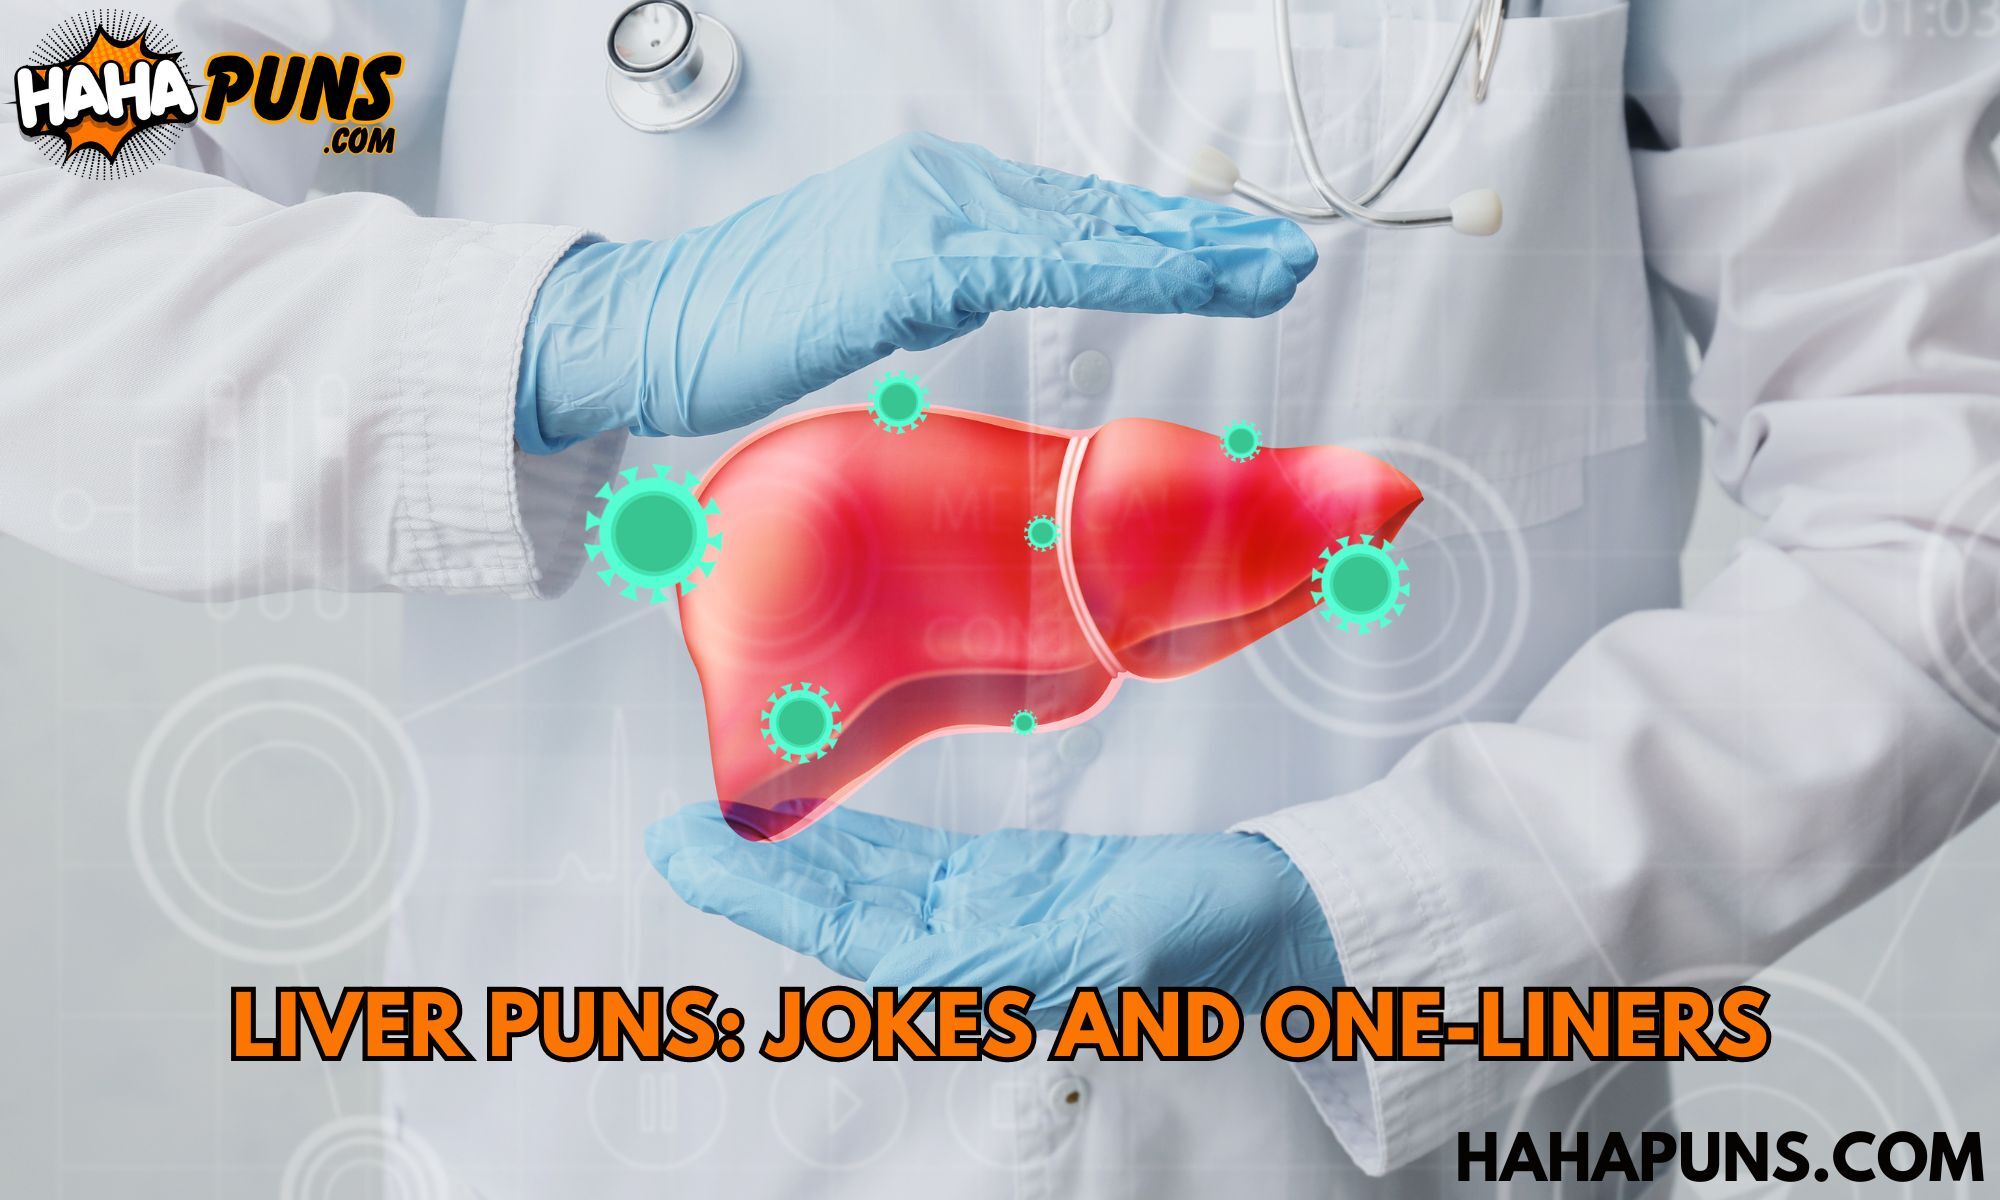 Liver Puns: Jokes And One-Liners